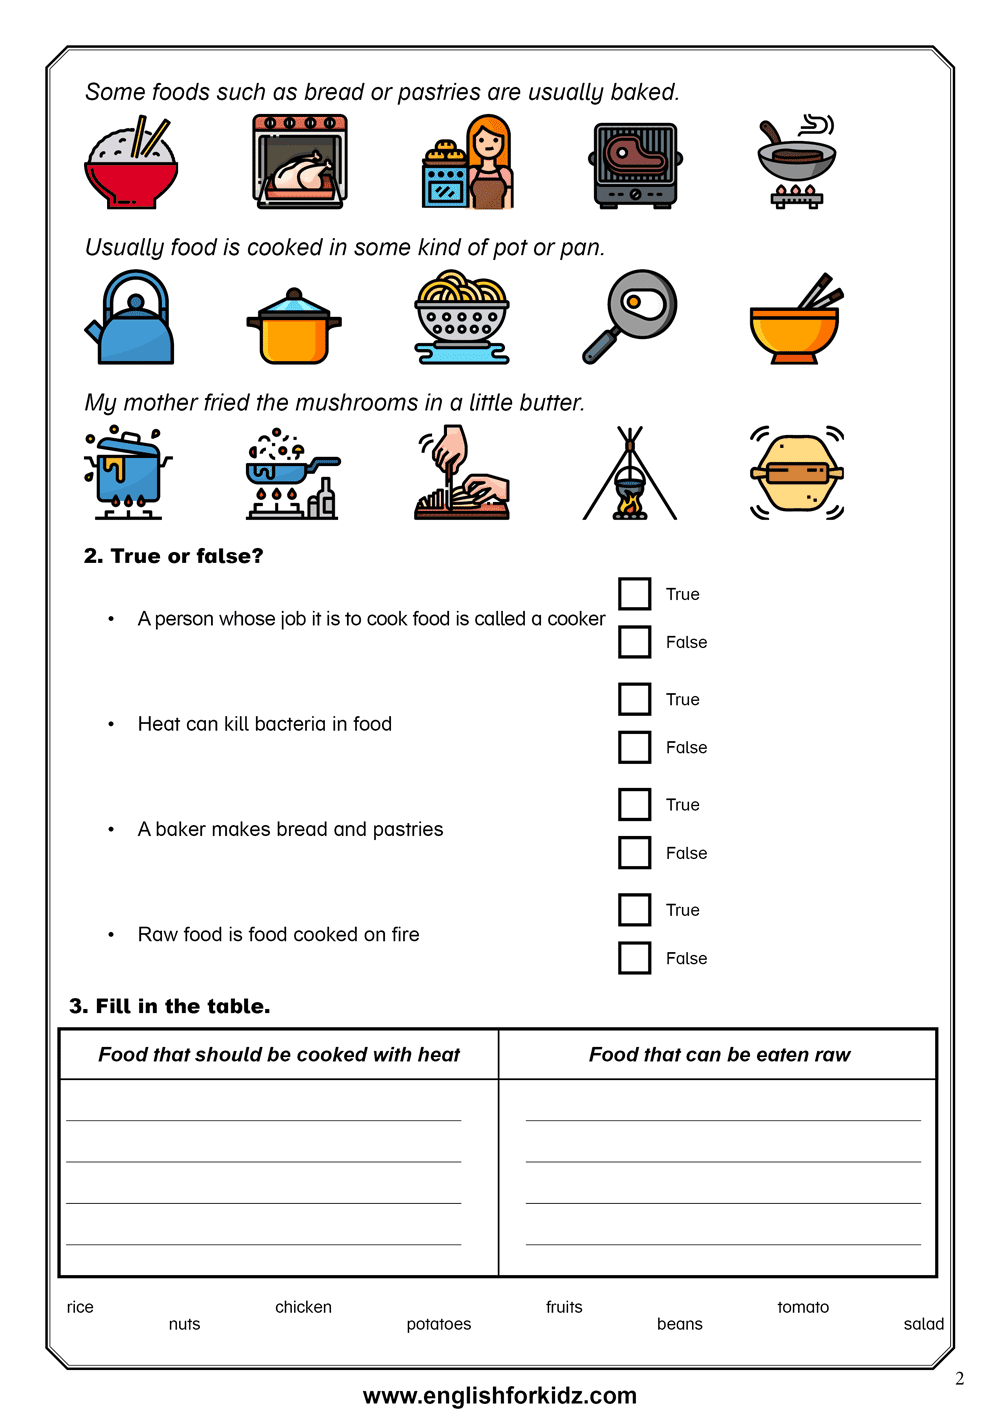 English For Kids Step By Step Reading Comprehension Worksheets Food 